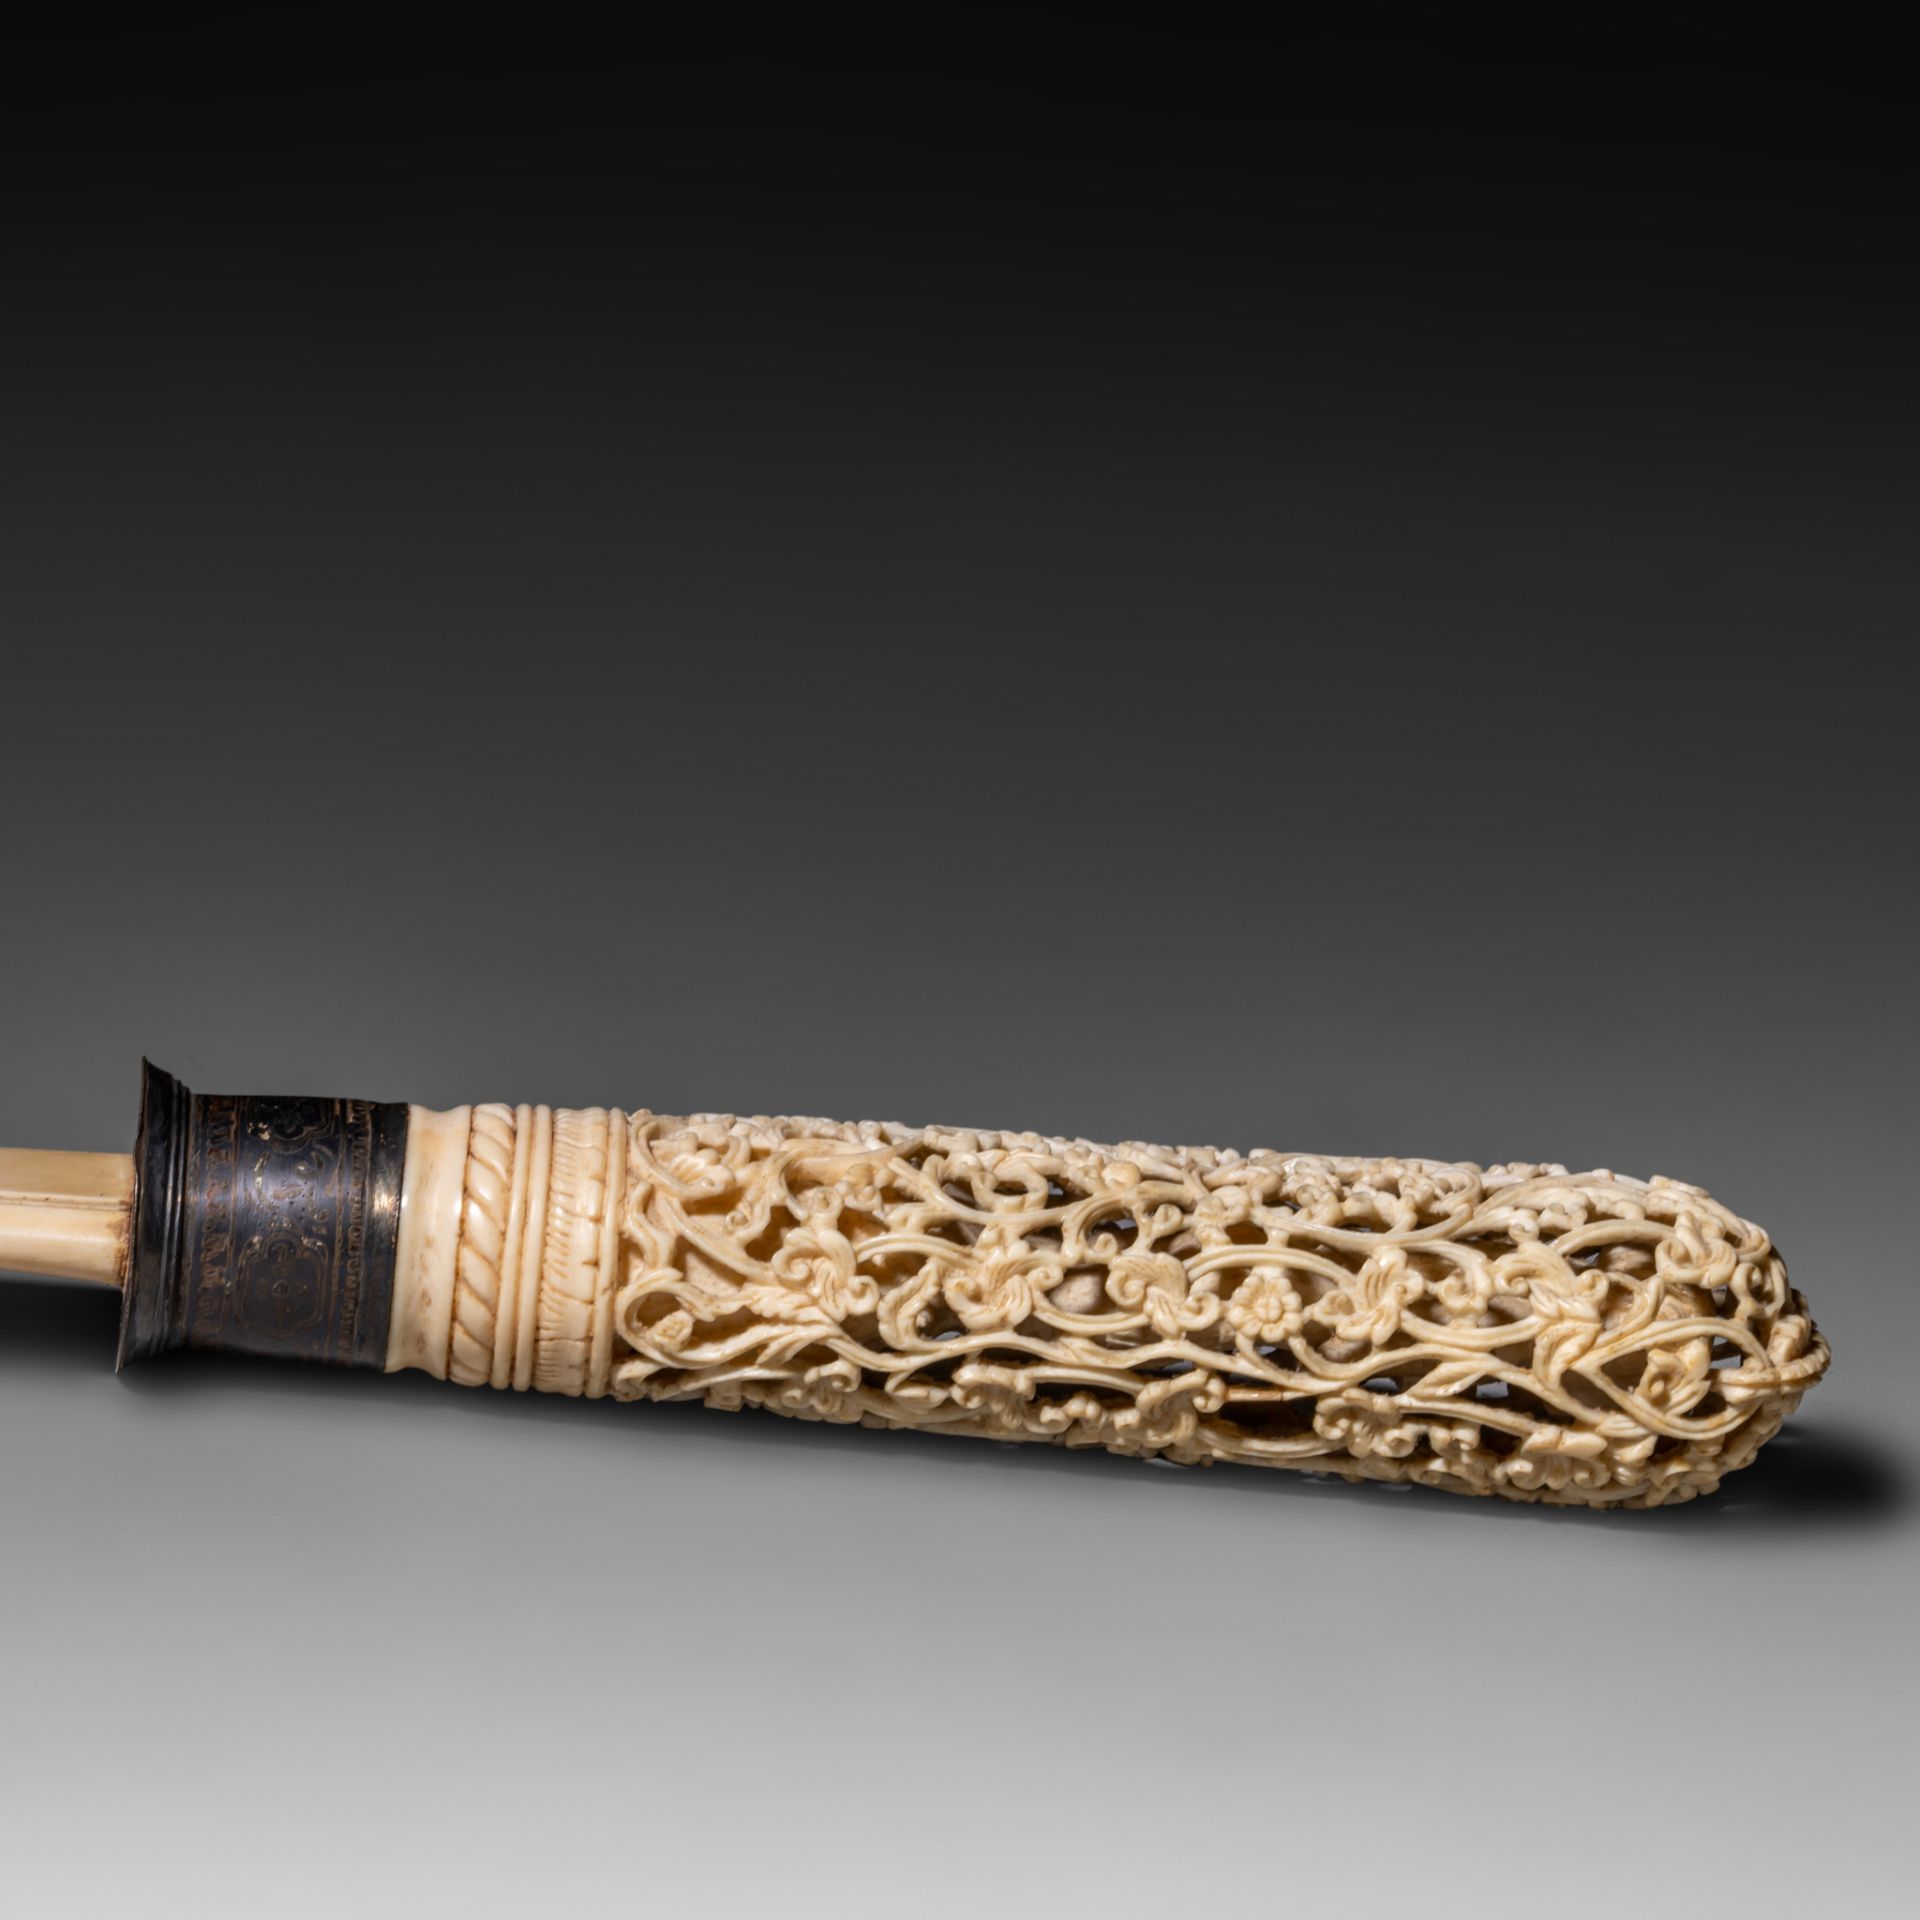 Two Burmese Colonial Ivory paperknives, L 51 cm - 200 g / L 35,8 cm - 80 g, both items are 19th or e - Bild 11 aus 18